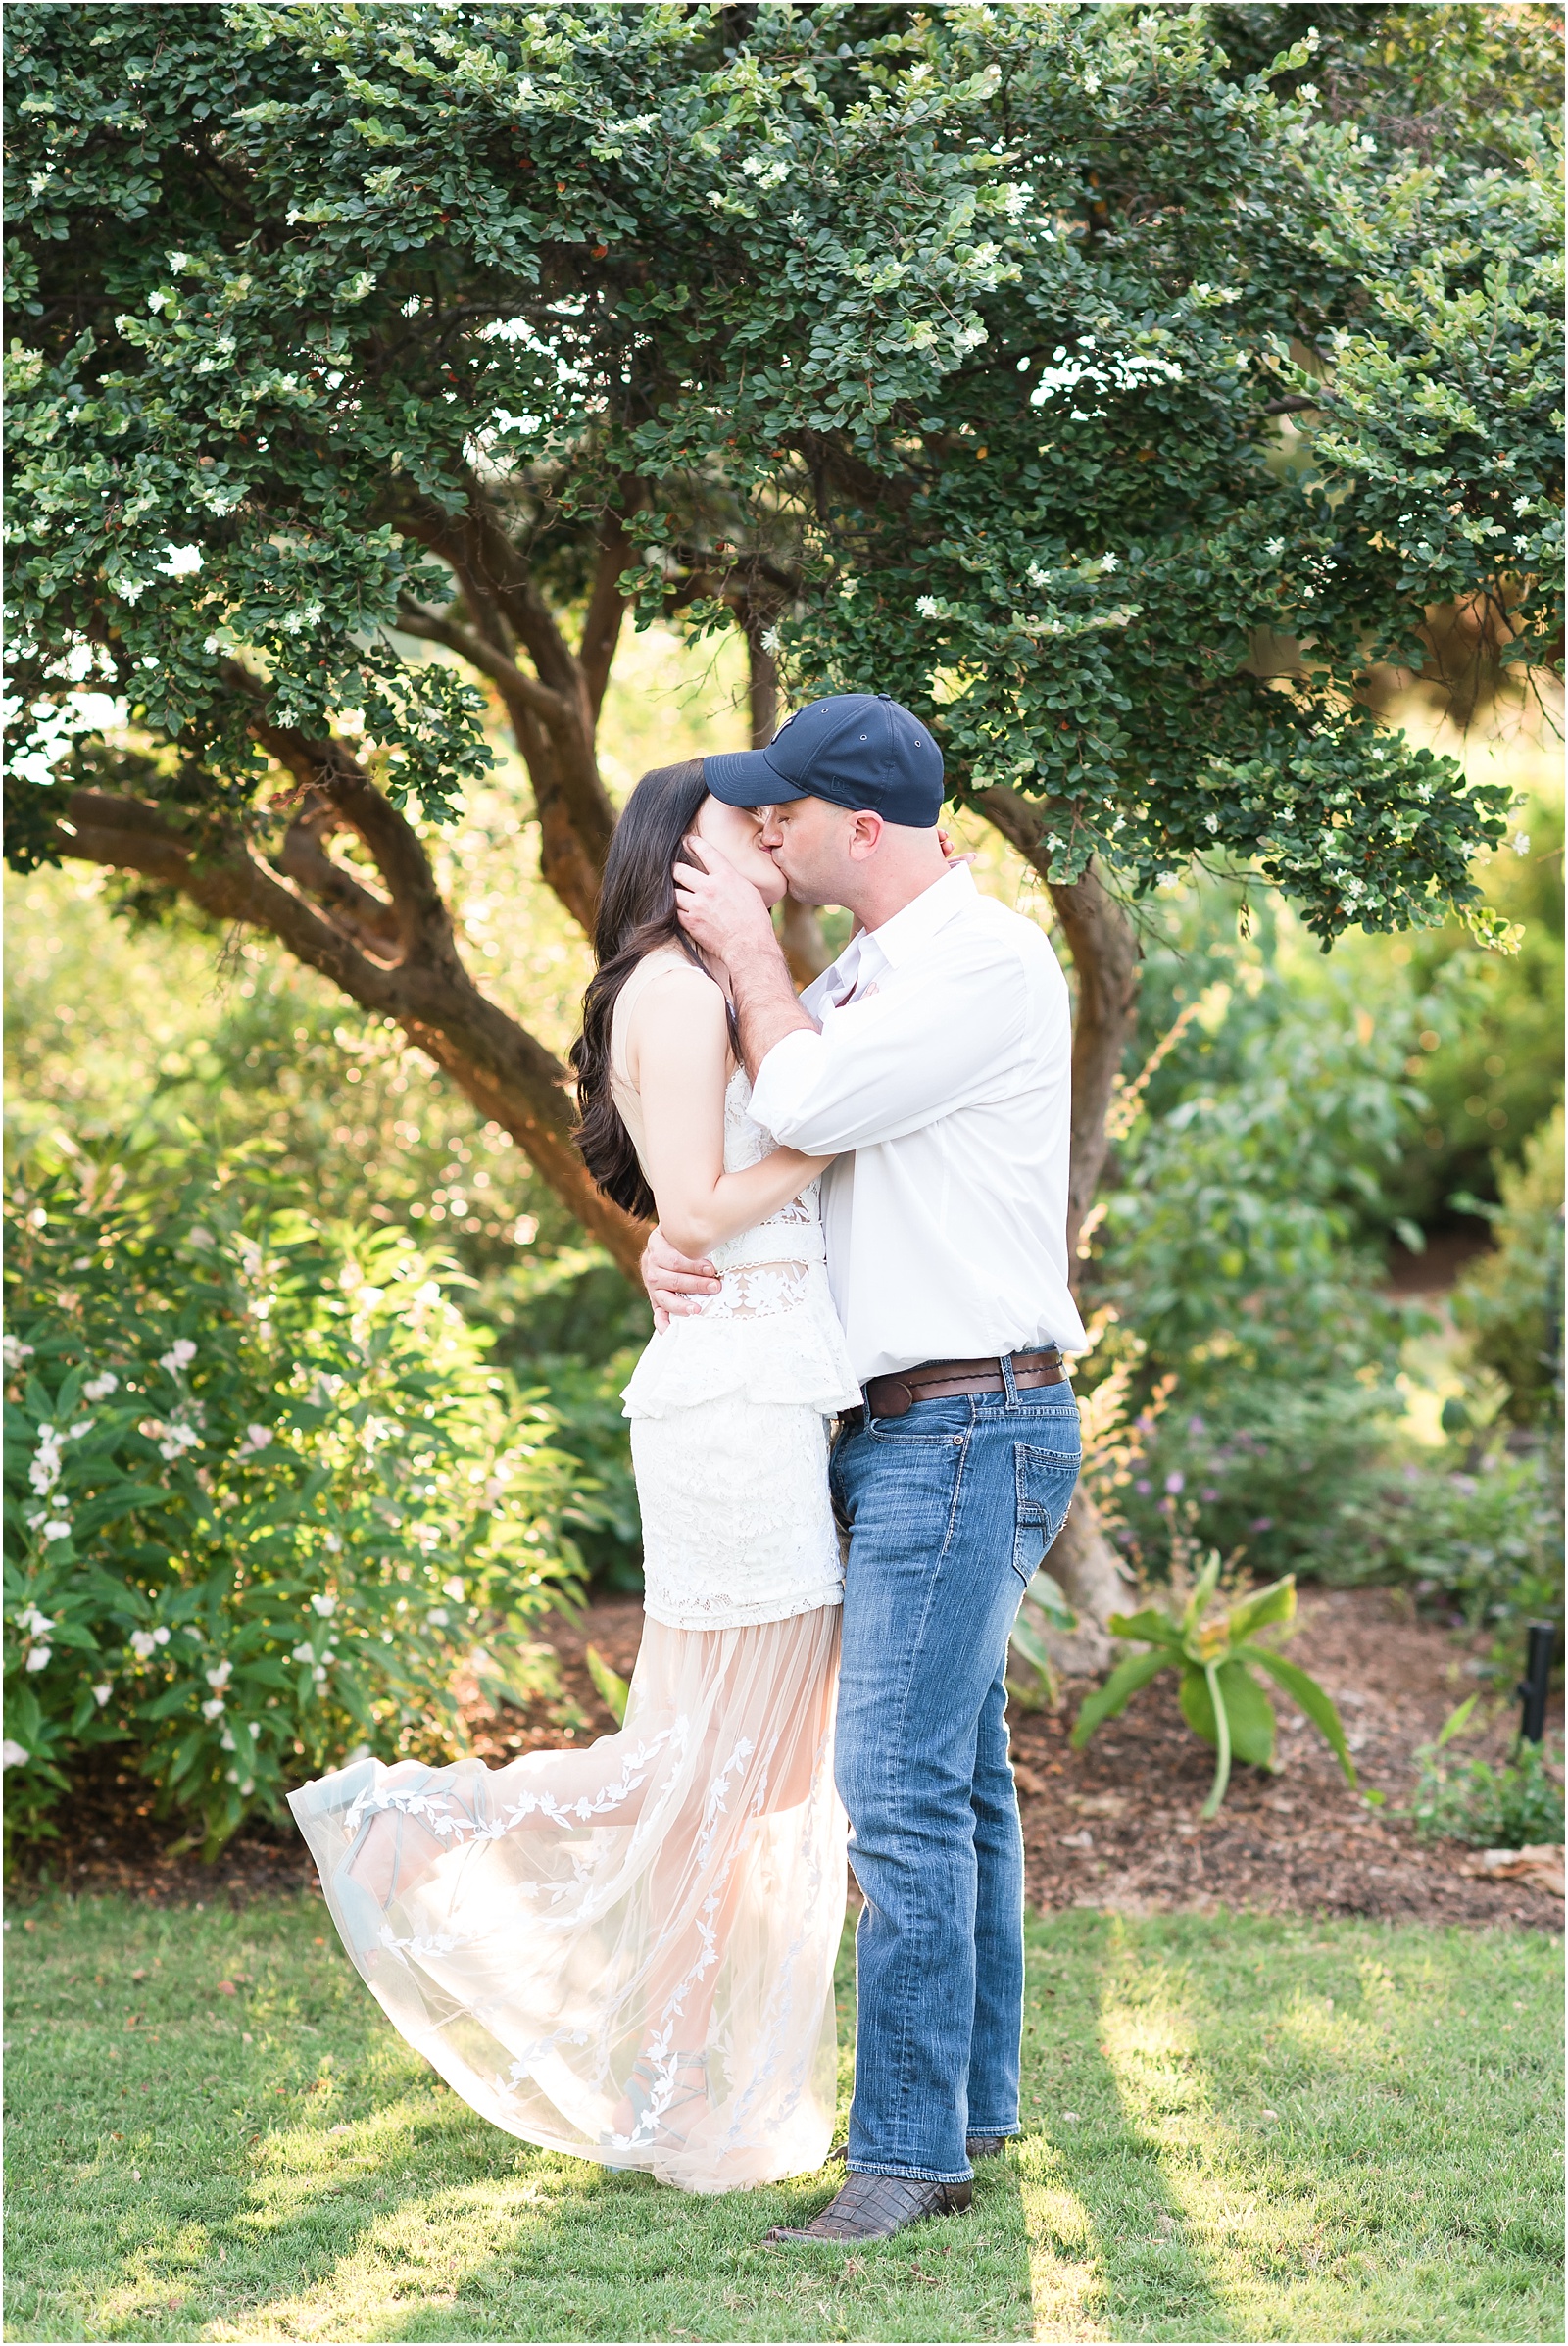 man wearing a white shirt and dark blue jeans cupping his fiance's check and giving her a kiss while she wearing a white dress and dusty blue heels pops her foot up at JC Raulston Arboretum